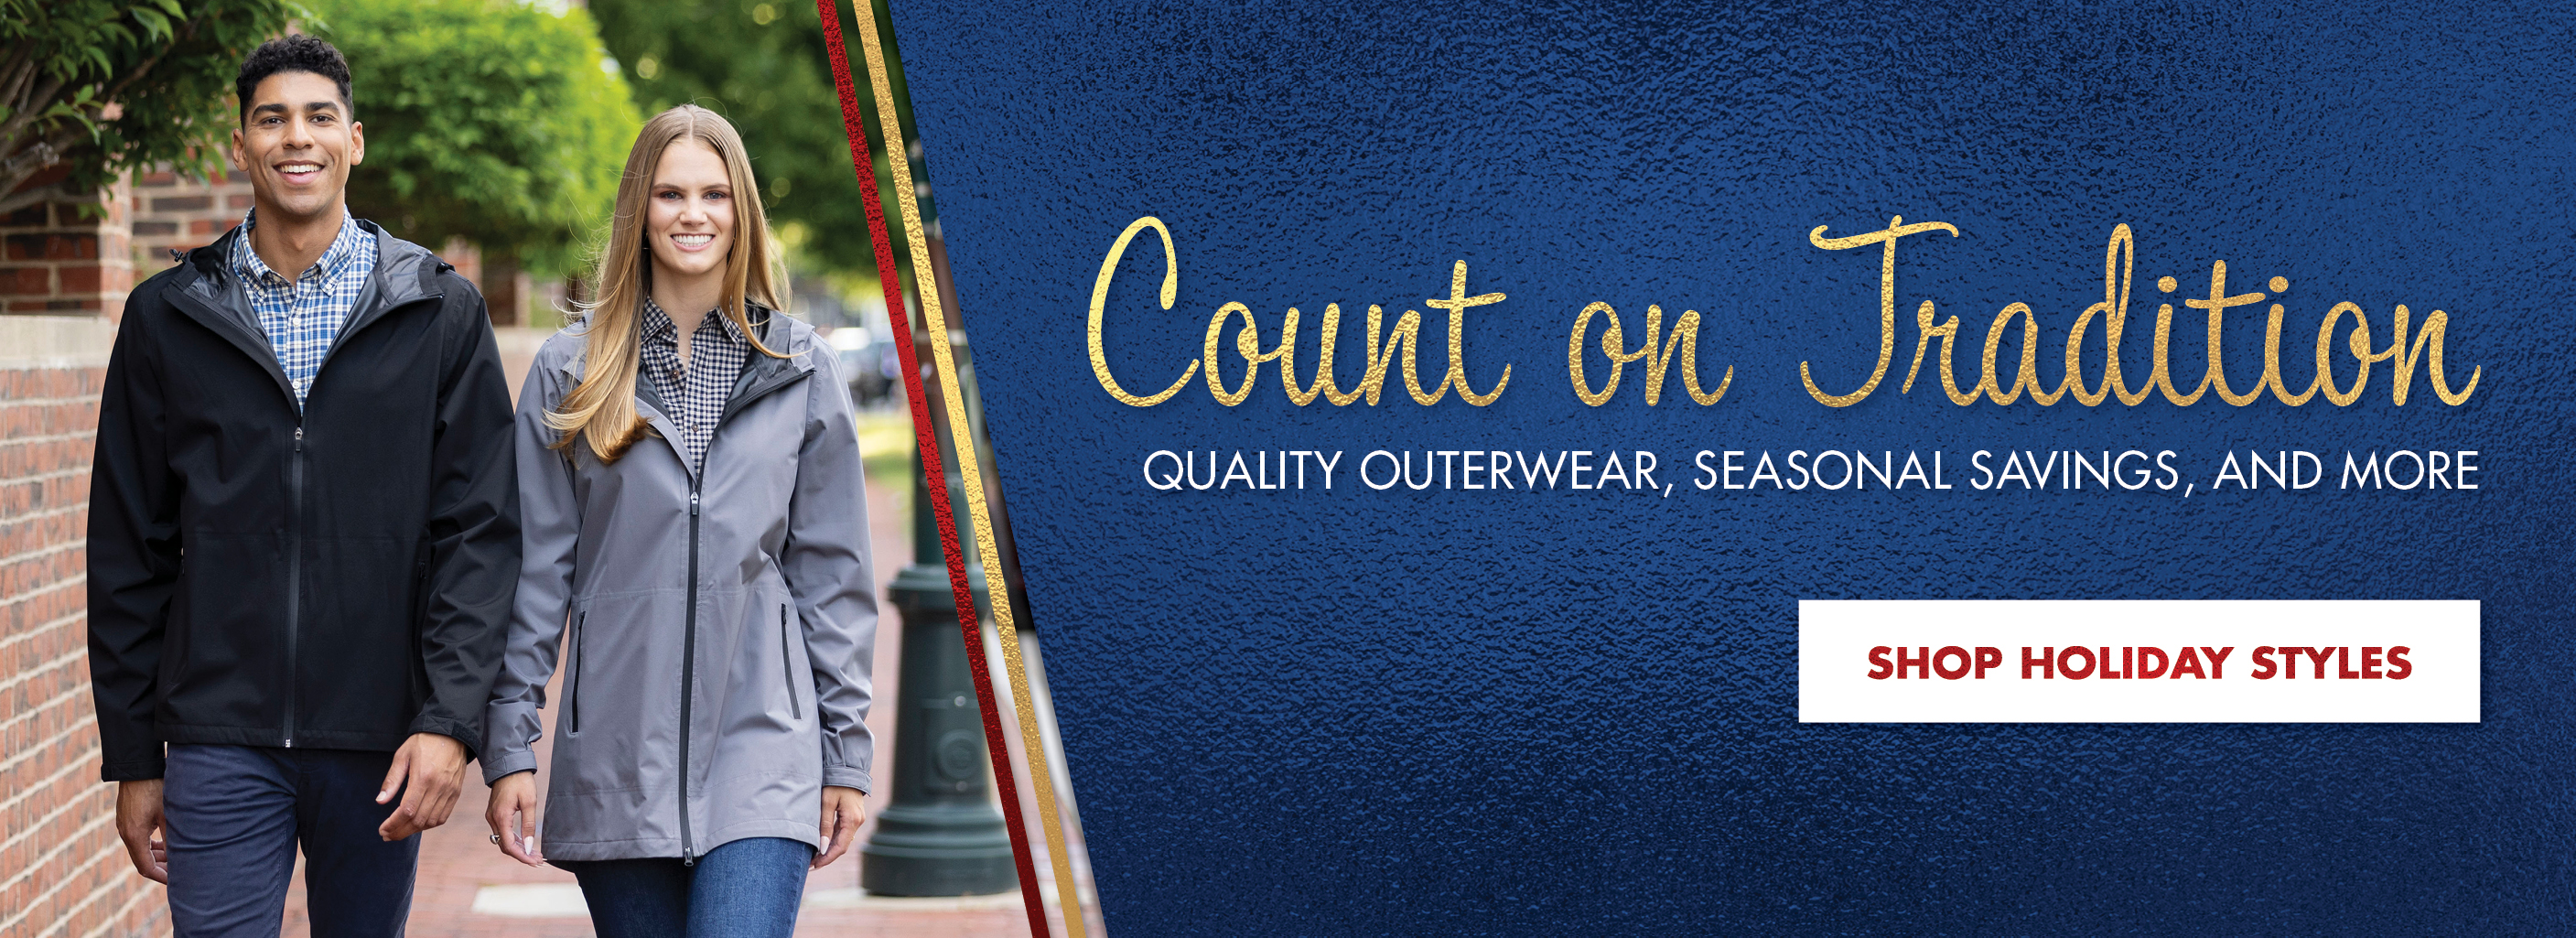 Count on Tradition - Quality Outerwear, Seasonal Savings, and More! Shop Holiday Styles